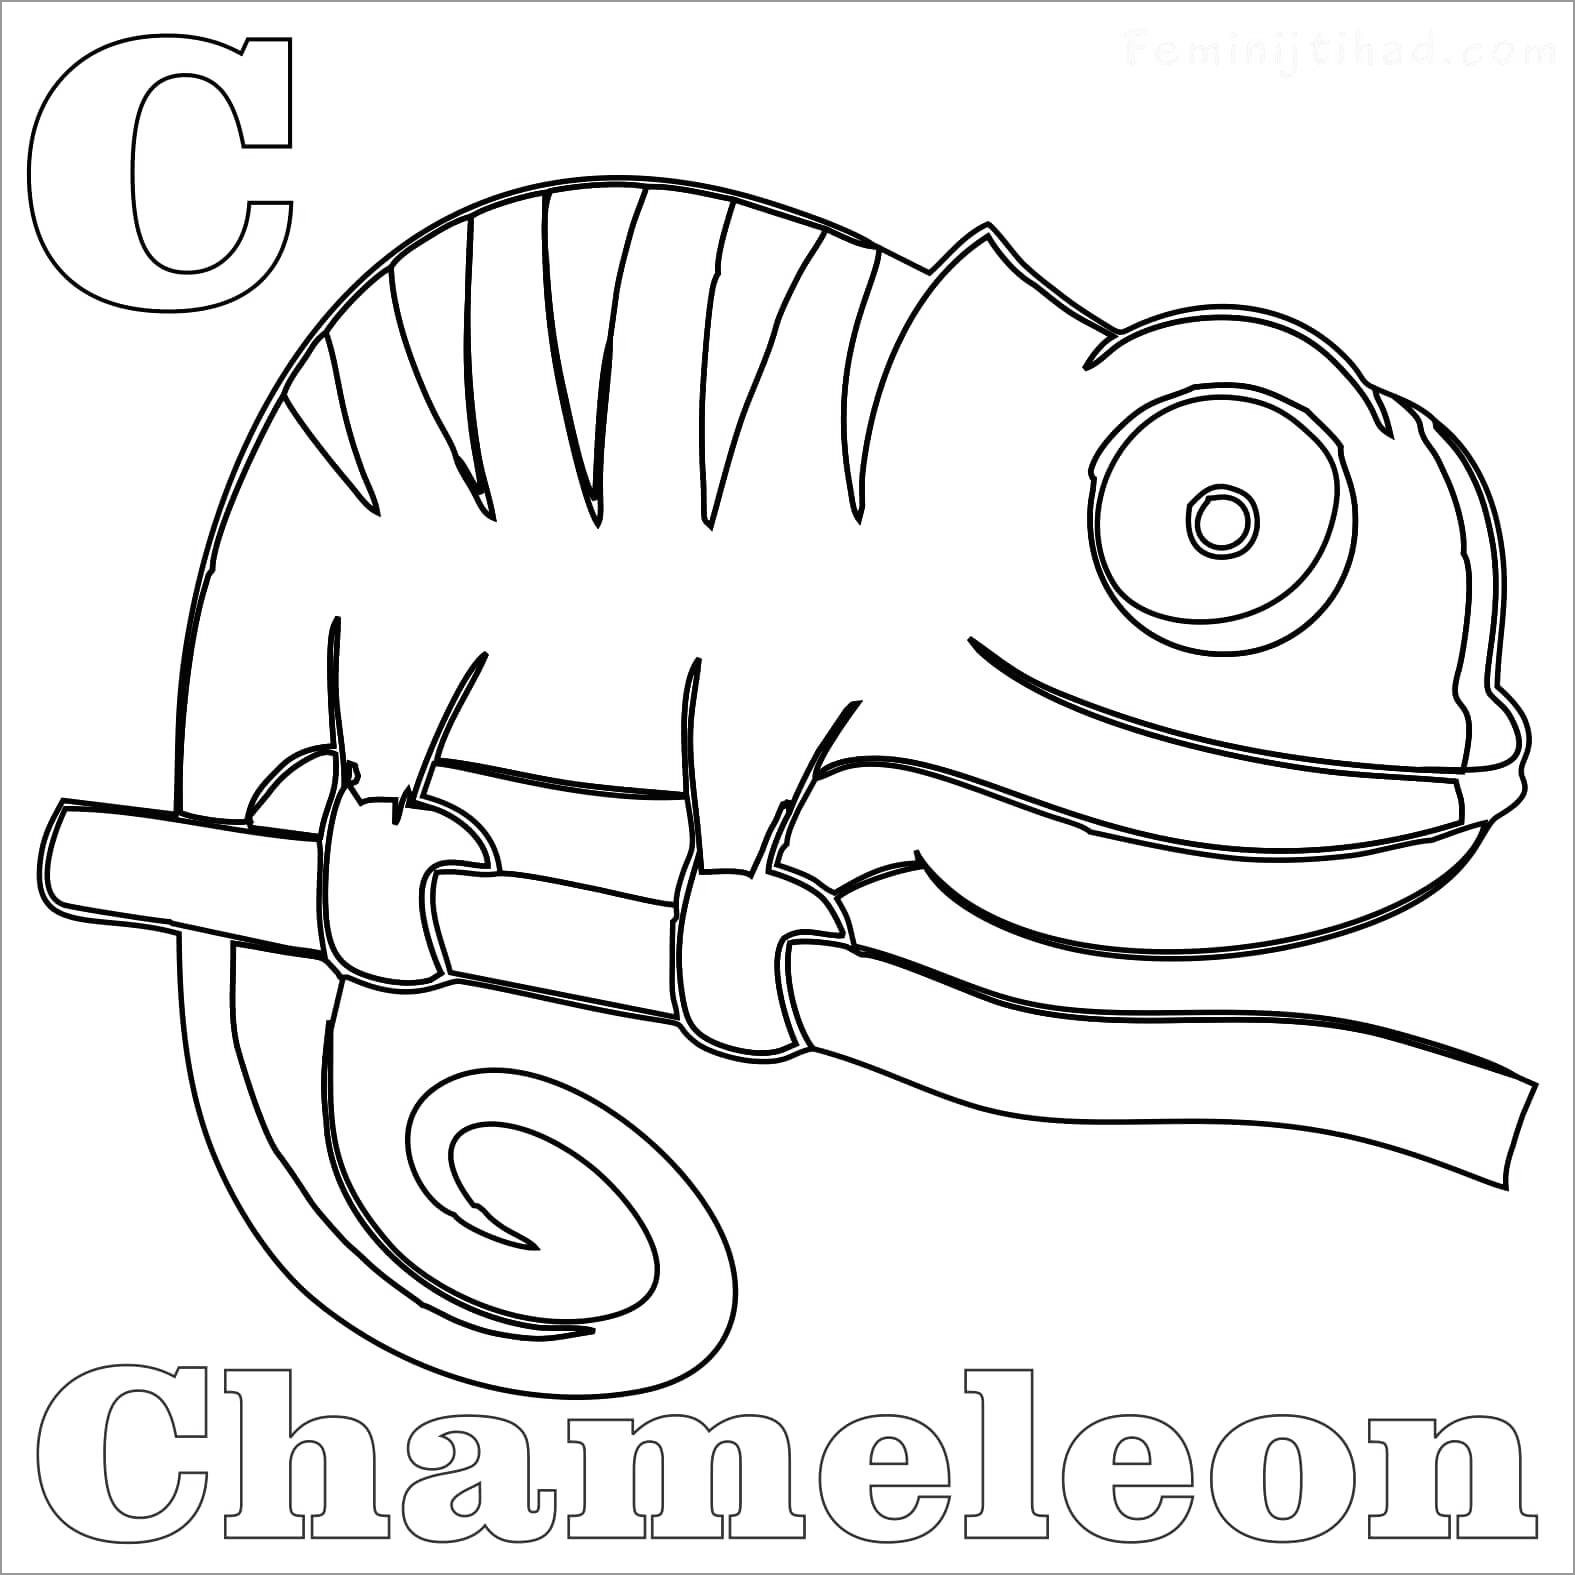 C for Chameleon Coloring Page